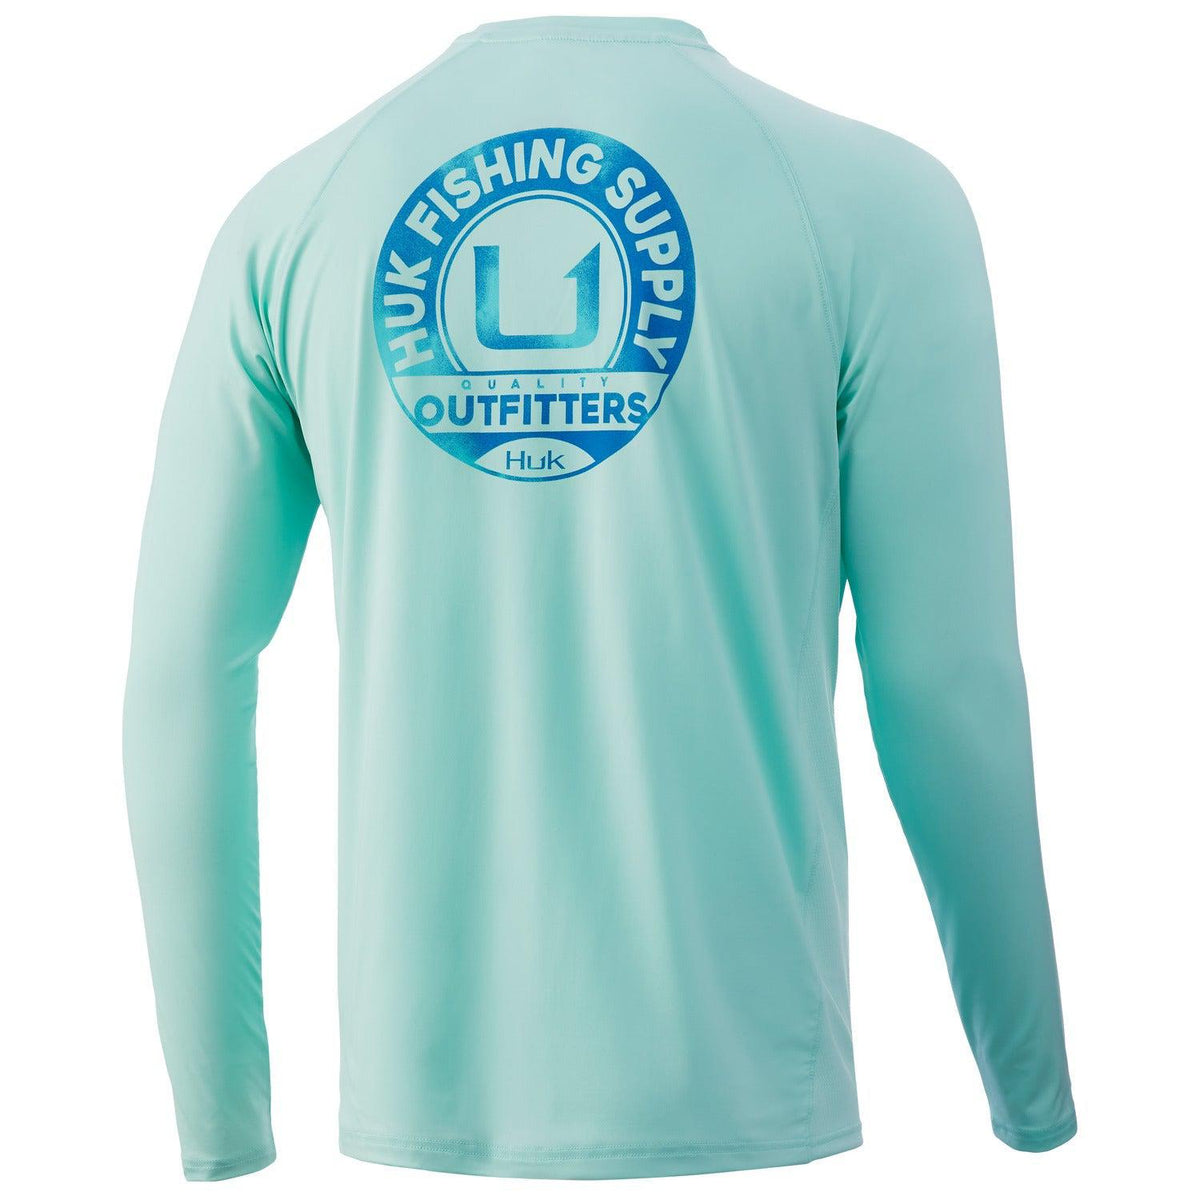 HUK Outfitter Pursuit Long Sleeve